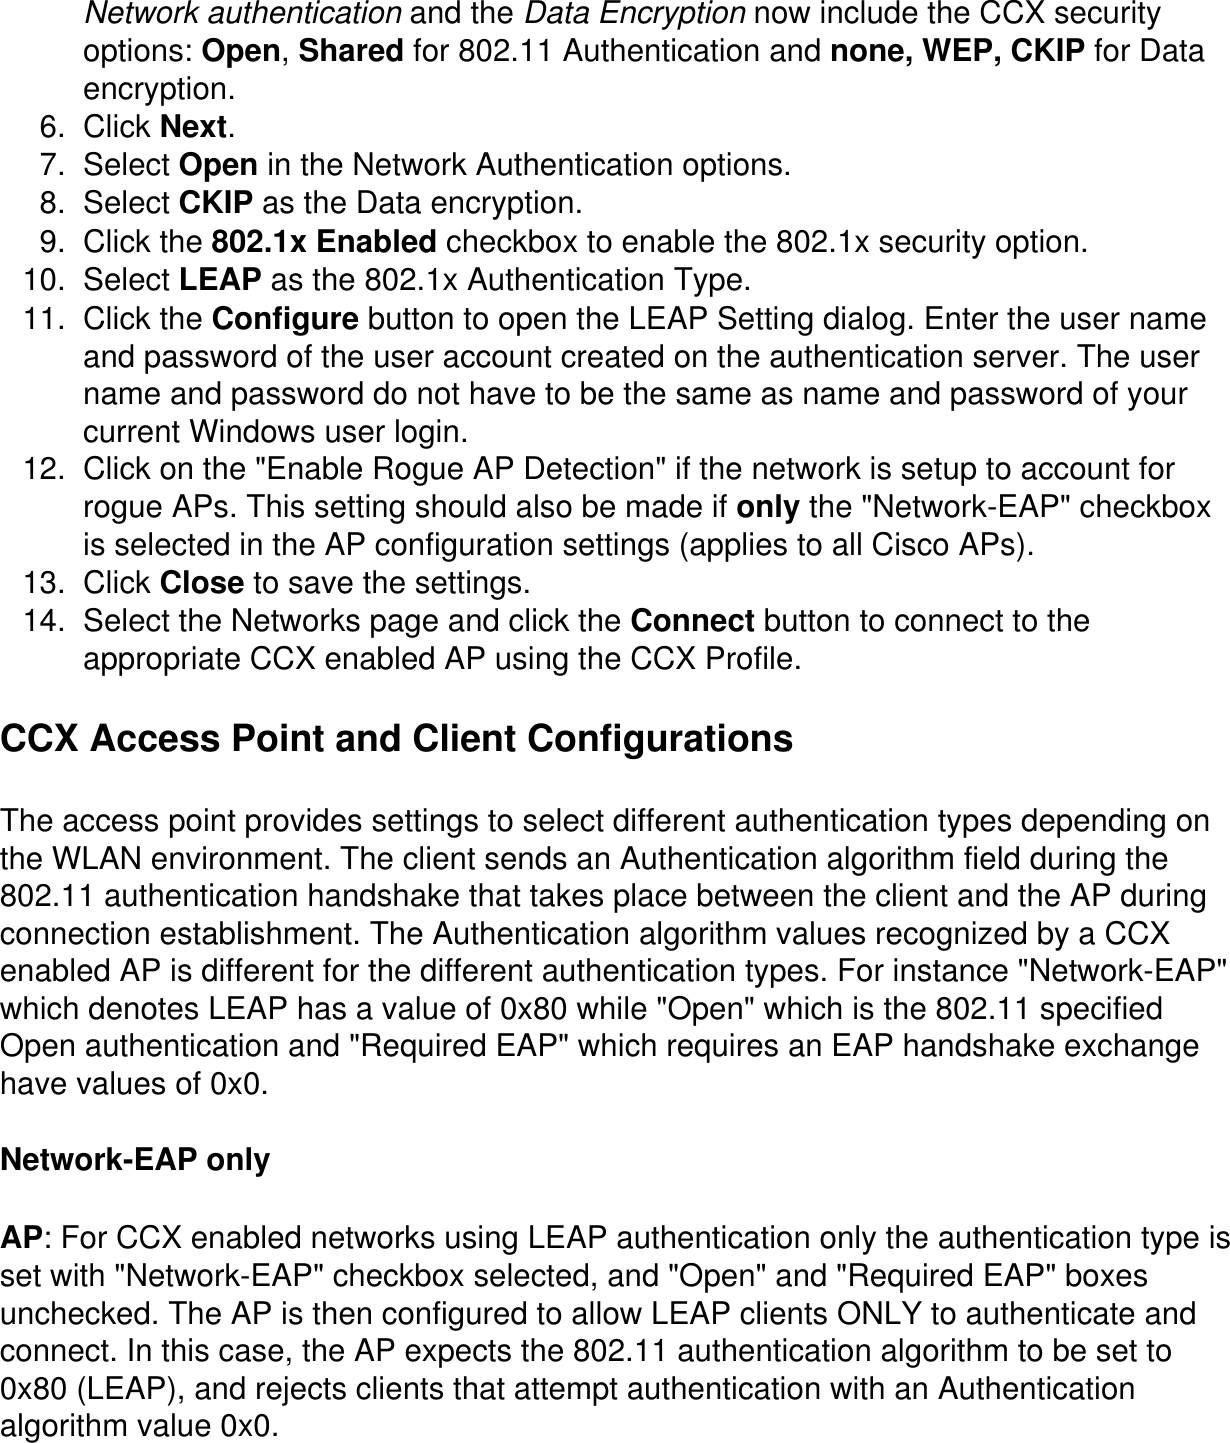 Network authentication and the Data Encryption now include the CCX security options: Open, Shared for 802.11 Authentication and none, WEP, CKIP for Data encryption. 6.  Click Next.7.  Select Open in the Network Authentication options.8.  Select CKIP as the Data encryption. 9.  Click the 802.1x Enabled checkbox to enable the 802.1x security option. 10.  Select LEAP as the 802.1x Authentication Type. 11.  Click the Configure button to open the LEAP Setting dialog. Enter the user name and password of the user account created on the authentication server. The user name and password do not have to be the same as name and password of your current Windows user login.  12.  Click on the &quot;Enable Rogue AP Detection&quot; if the network is setup to account for rogue APs. This setting should also be made if only the &quot;Network-EAP&quot; checkbox is selected in the AP configuration settings (applies to all Cisco APs).13.  Click Close to save the settings.  14.  Select the Networks page and click the Connect button to connect to the appropriate CCX enabled AP using the CCX Profile.CCX Access Point and Client ConfigurationsThe access point provides settings to select different authentication types depending on the WLAN environment. The client sends an Authentication algorithm field during the 802.11 authentication handshake that takes place between the client and the AP during connection establishment. The Authentication algorithm values recognized by a CCX enabled AP is different for the different authentication types. For instance &quot;Network-EAP&quot; which denotes LEAP has a value of 0x80 while &quot;Open&quot; which is the 802.11 specified Open authentication and &quot;Required EAP&quot; which requires an EAP handshake exchange have values of 0x0.Network-EAP onlyAP: For CCX enabled networks using LEAP authentication only the authentication type is set with &quot;Network-EAP&quot; checkbox selected, and &quot;Open&quot; and &quot;Required EAP&quot; boxes unchecked. The AP is then configured to allow LEAP clients ONLY to authenticate and connect. In this case, the AP expects the 802.11 authentication algorithm to be set to 0x80 (LEAP), and rejects clients that attempt authentication with an Authentication algorithm value 0x0.